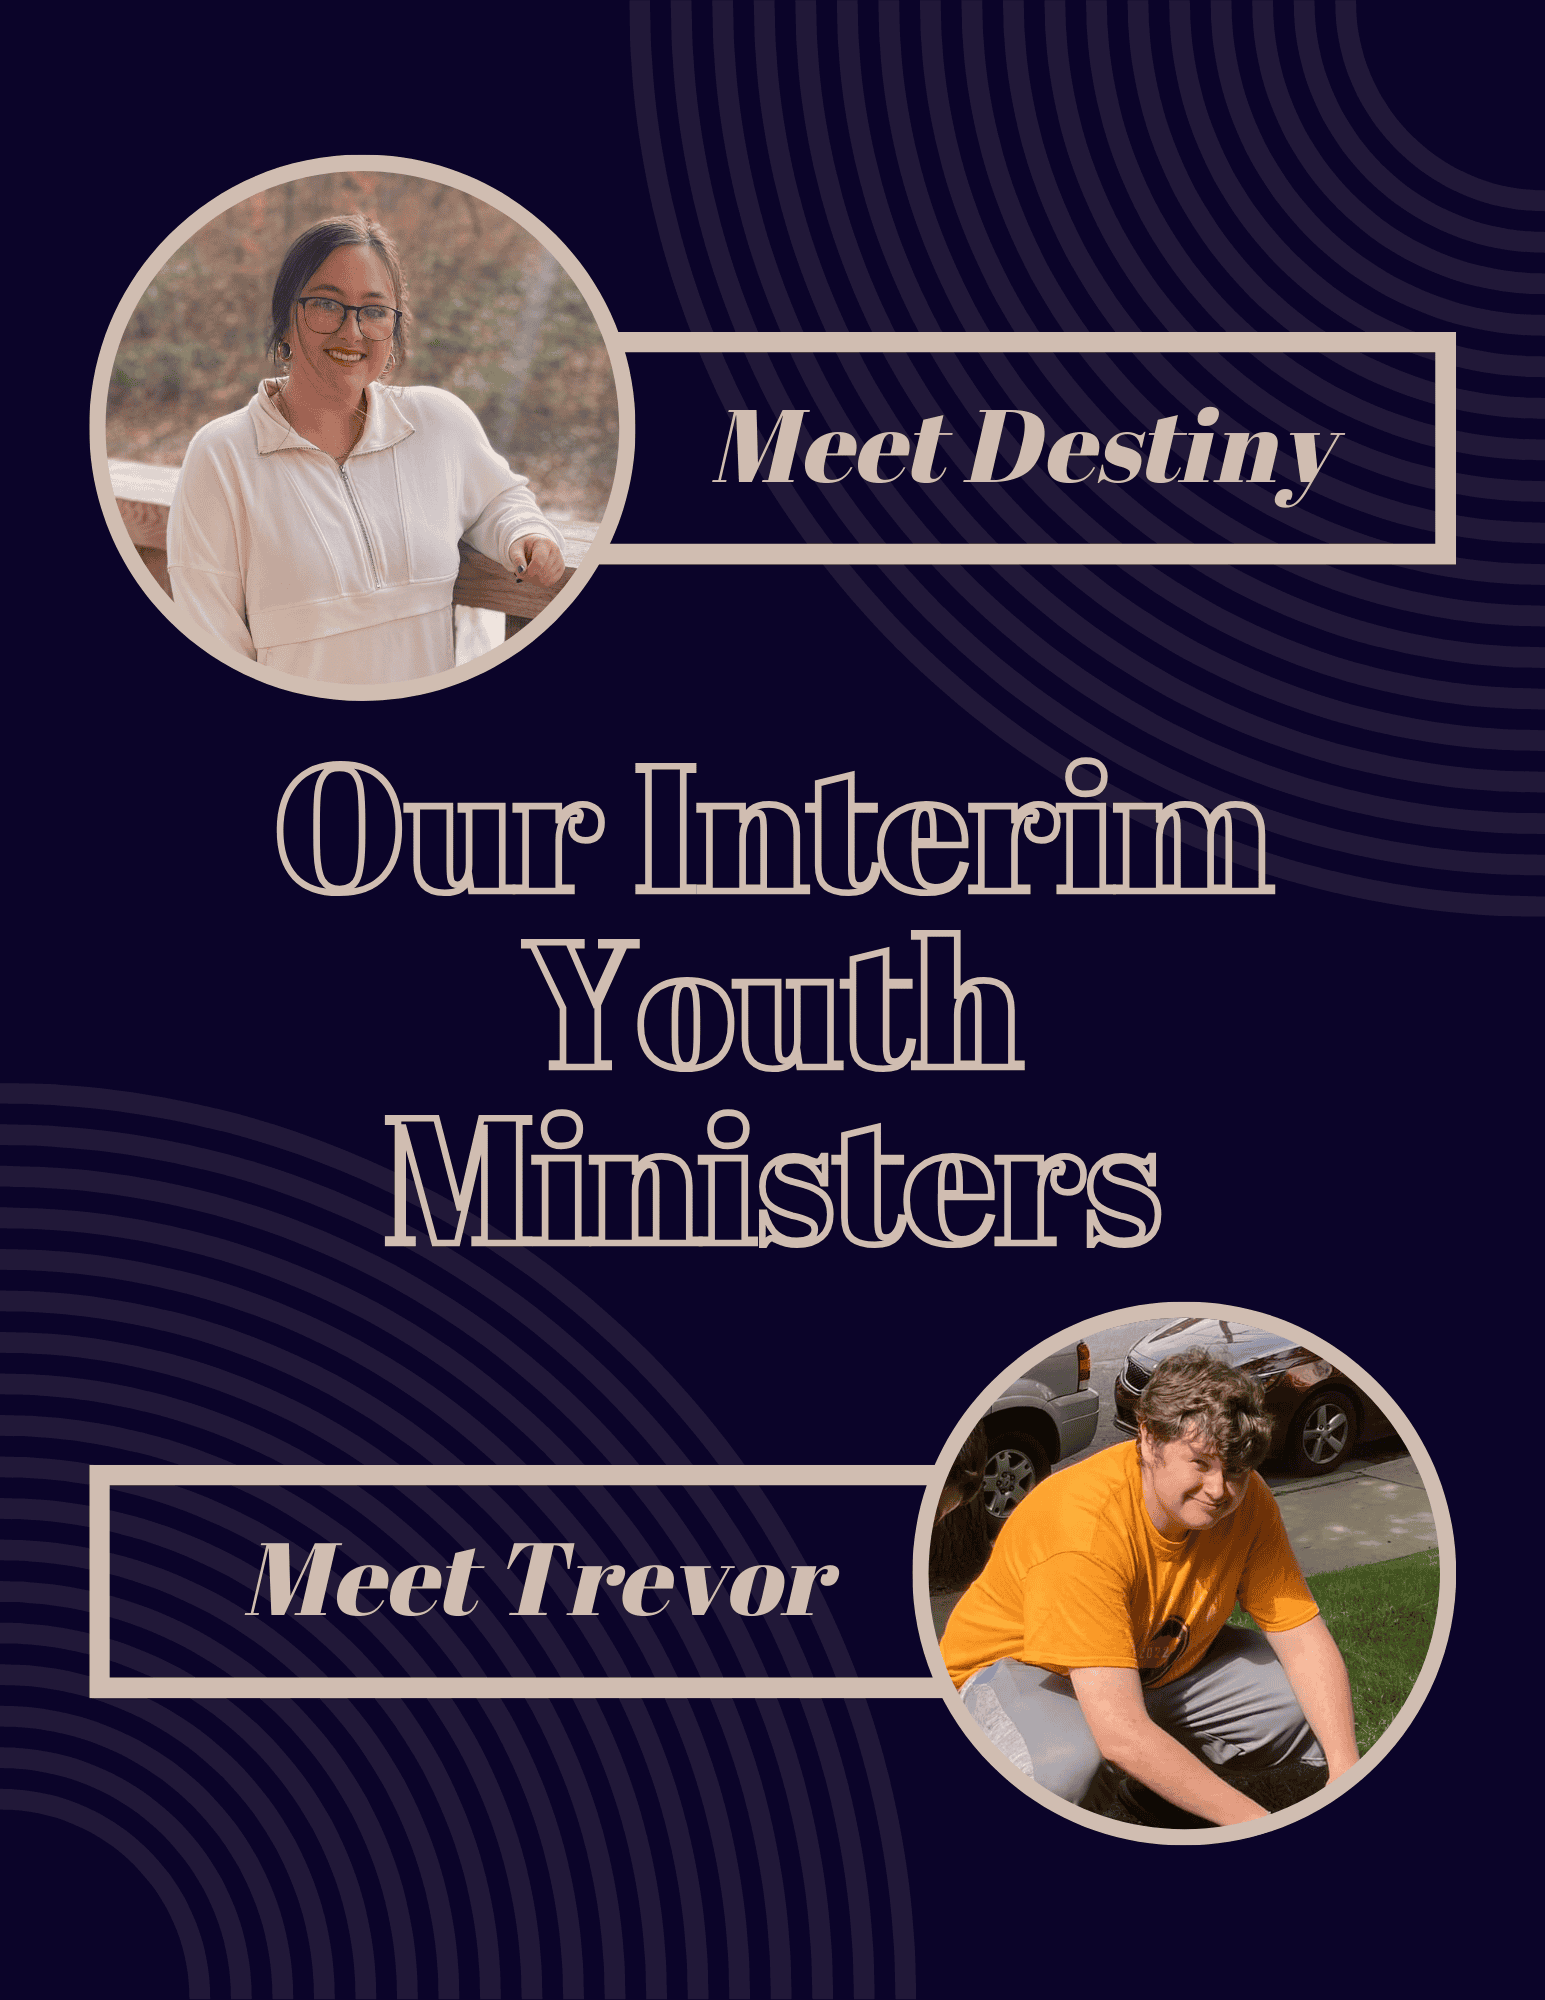 Our Interim Youth Ministers